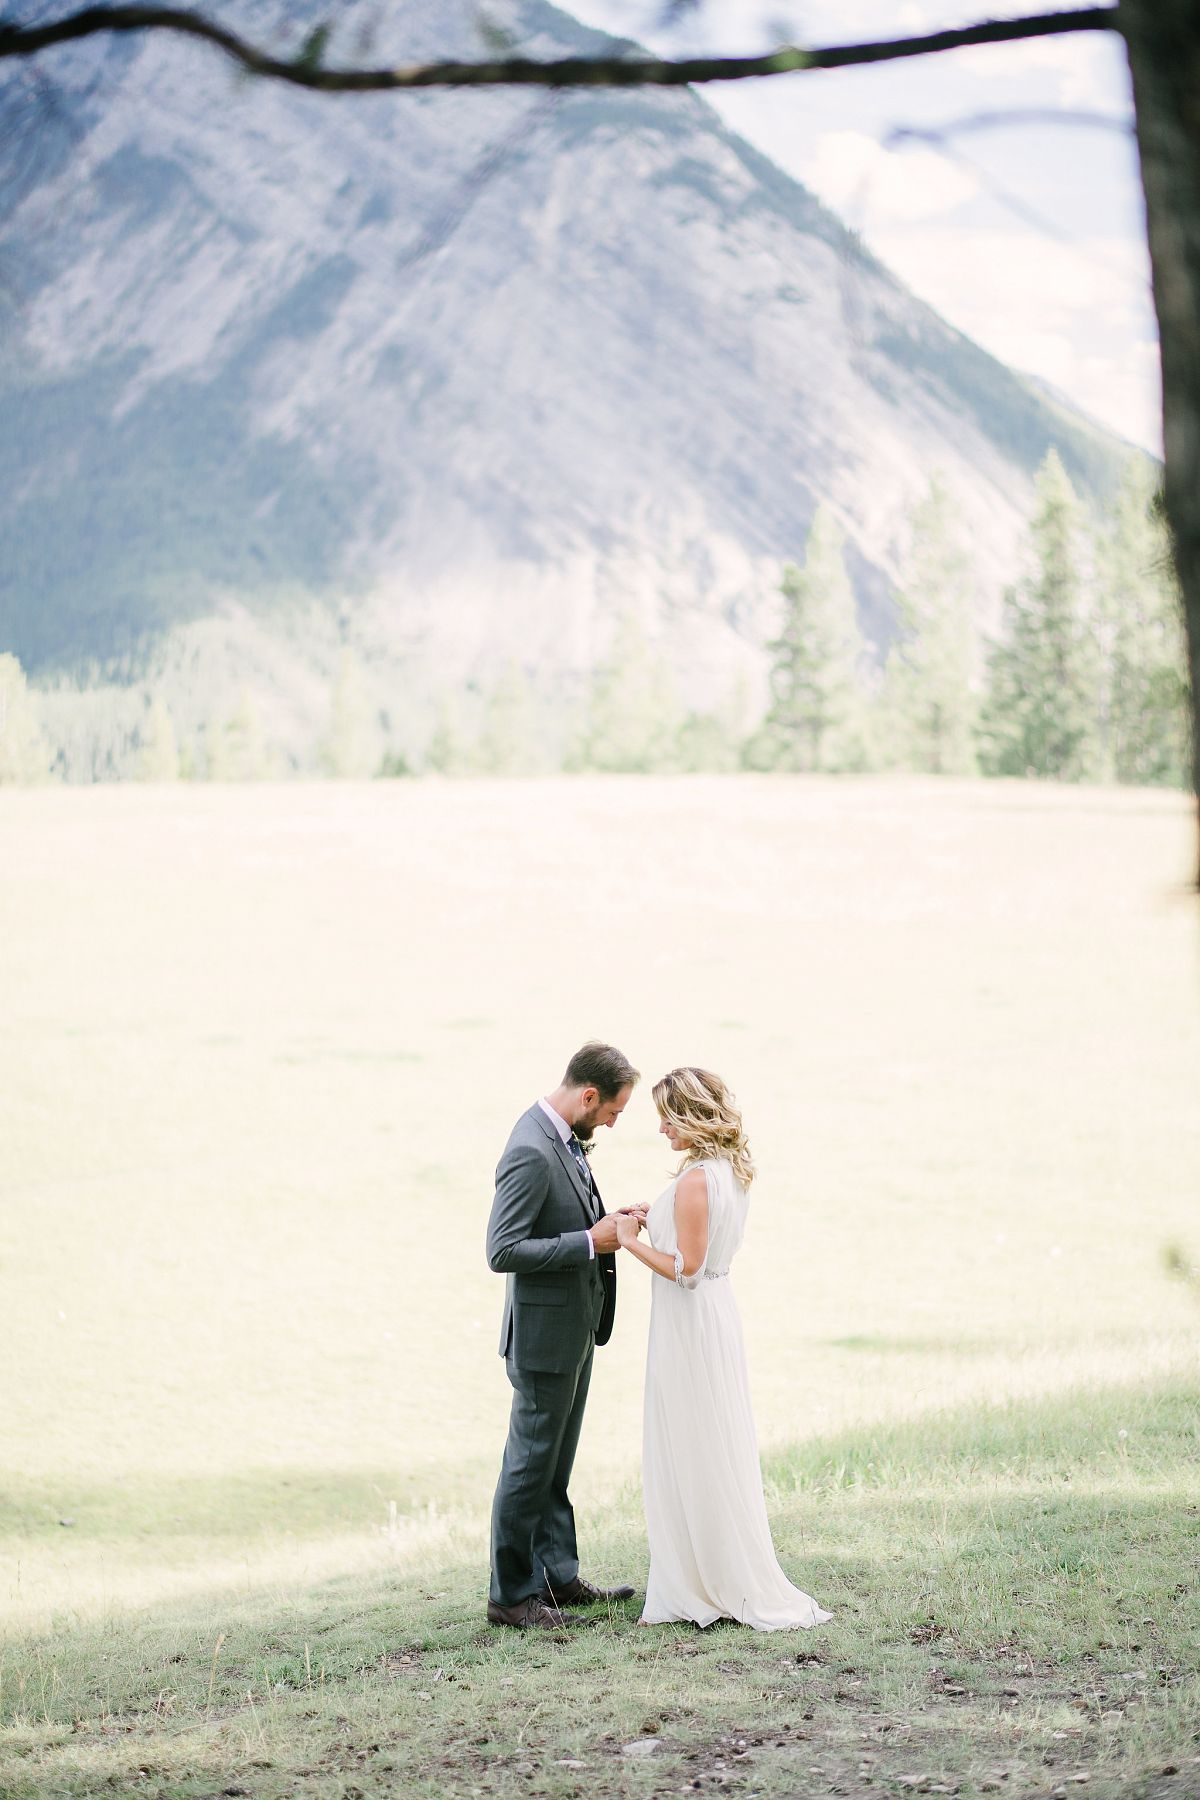 Maria and Sean's Intimate Banff Mountain Elopement